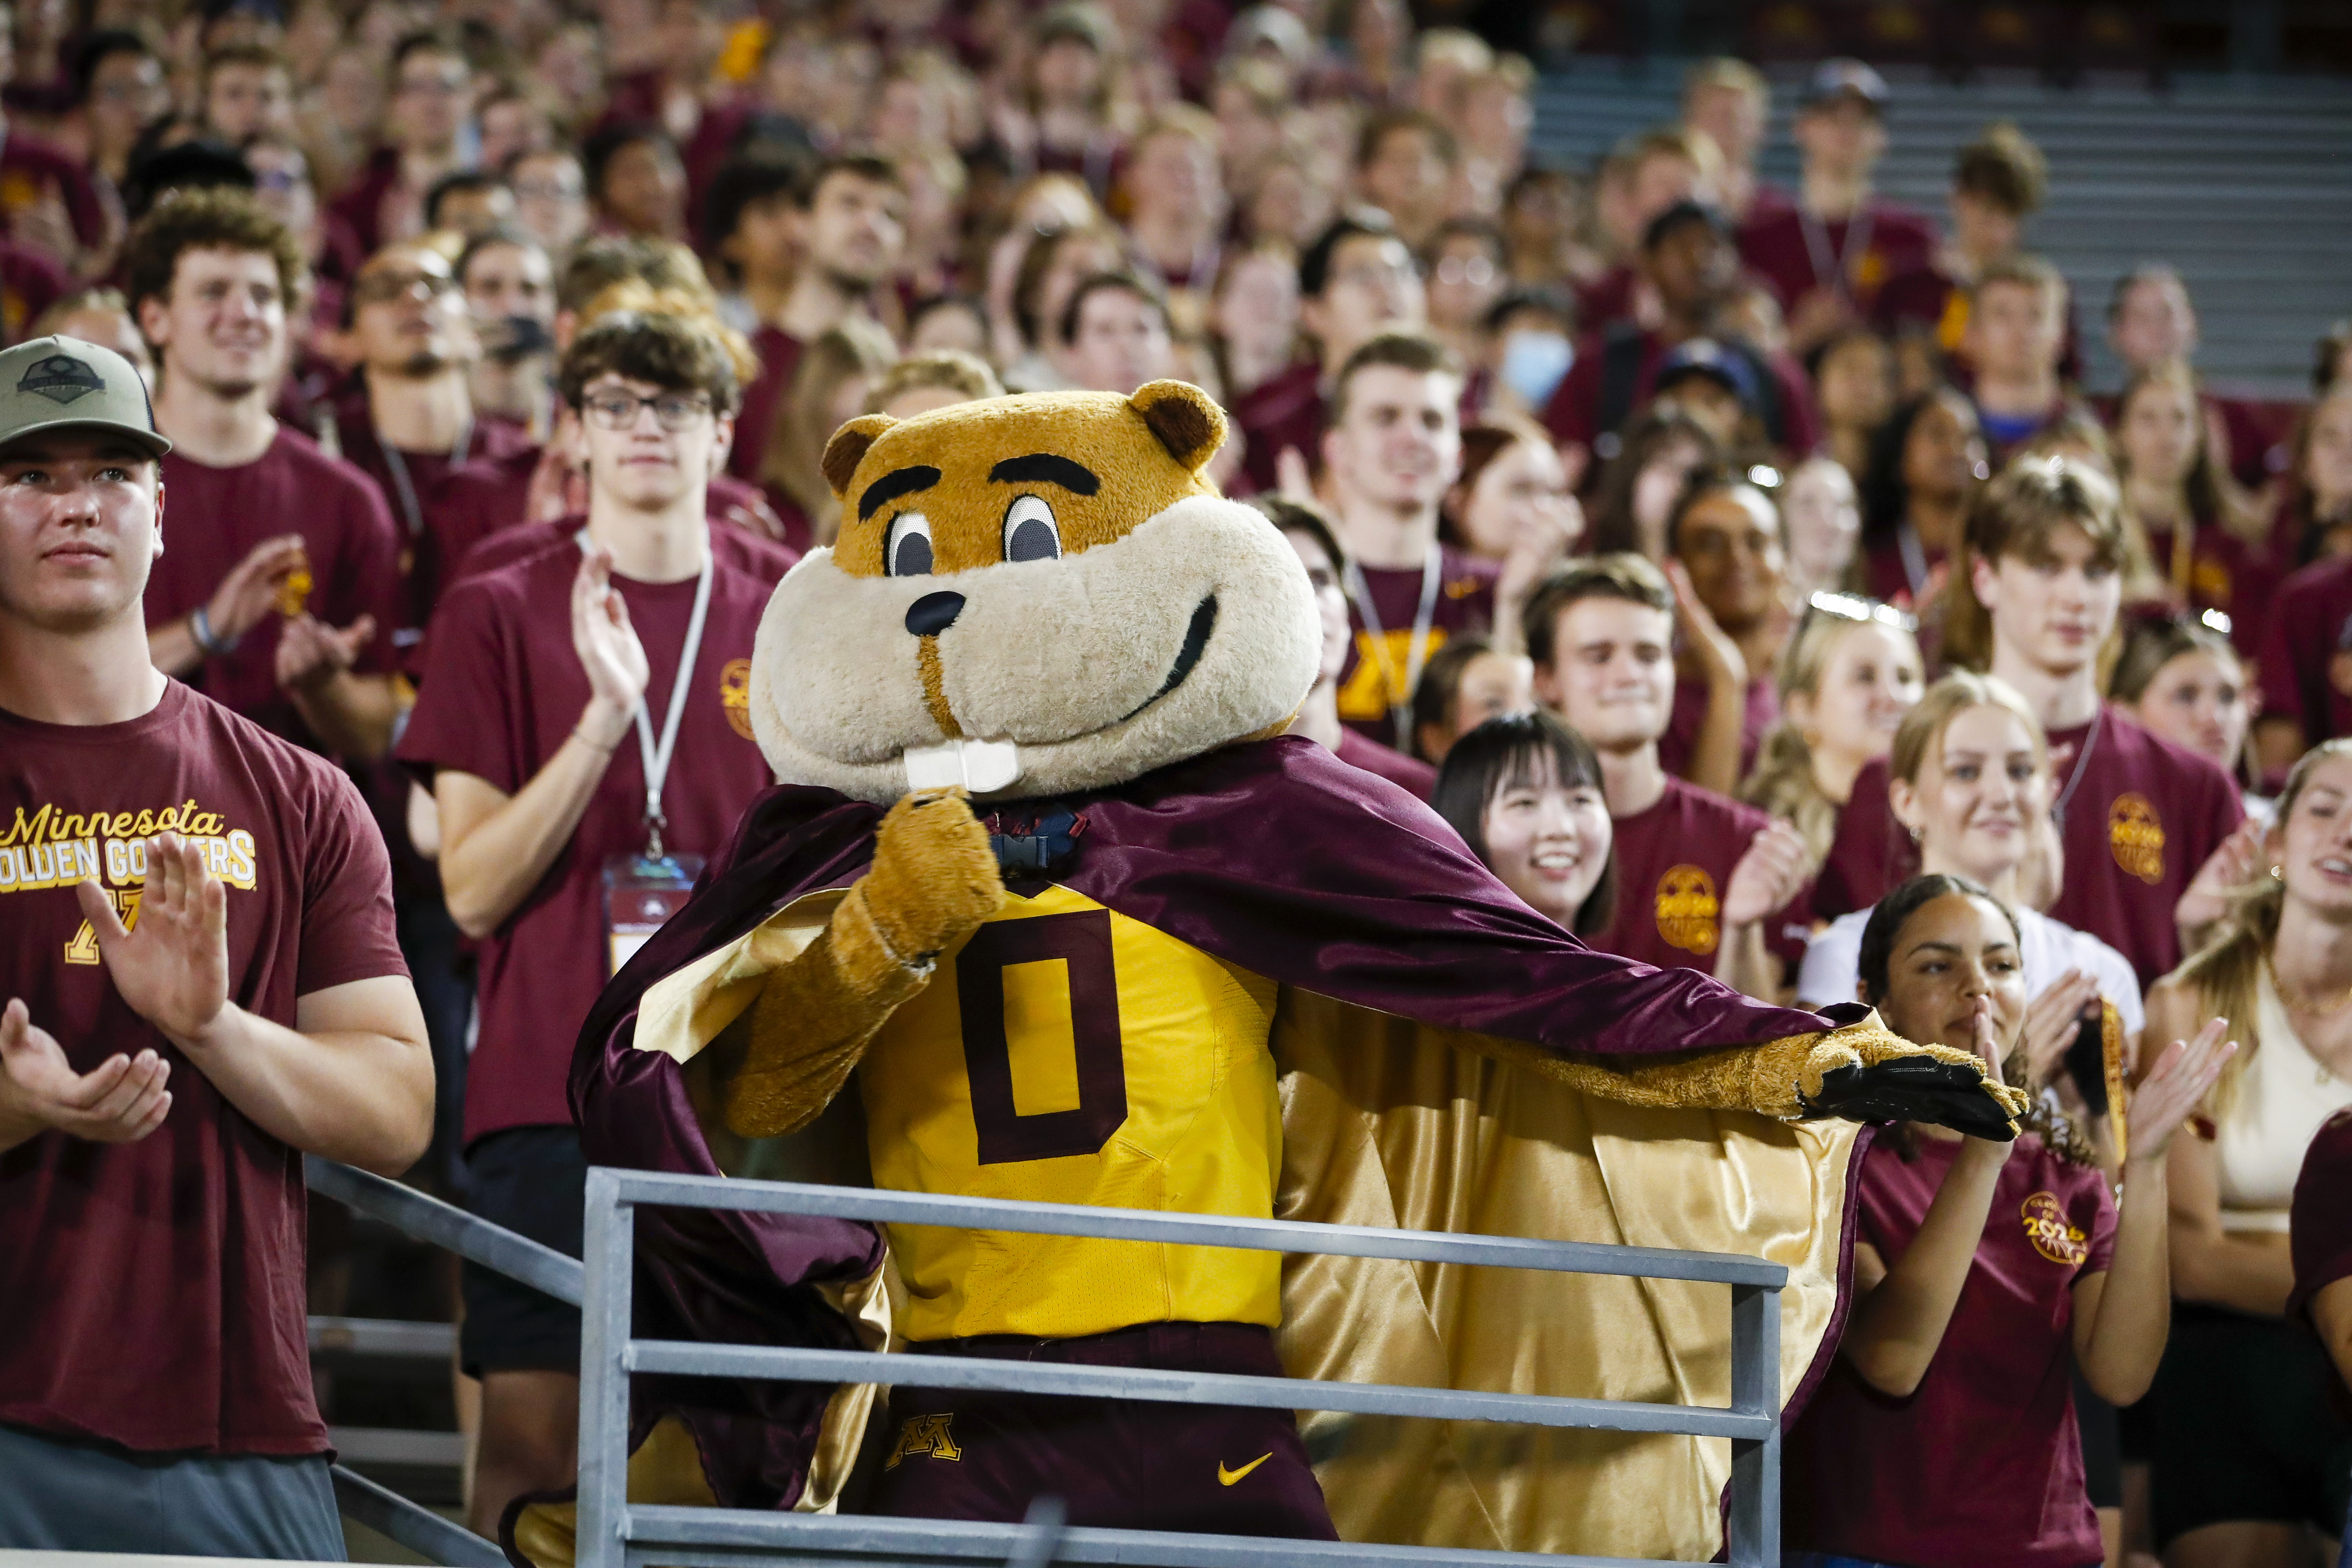 Goldy the Gopher cheering with fans in the stands